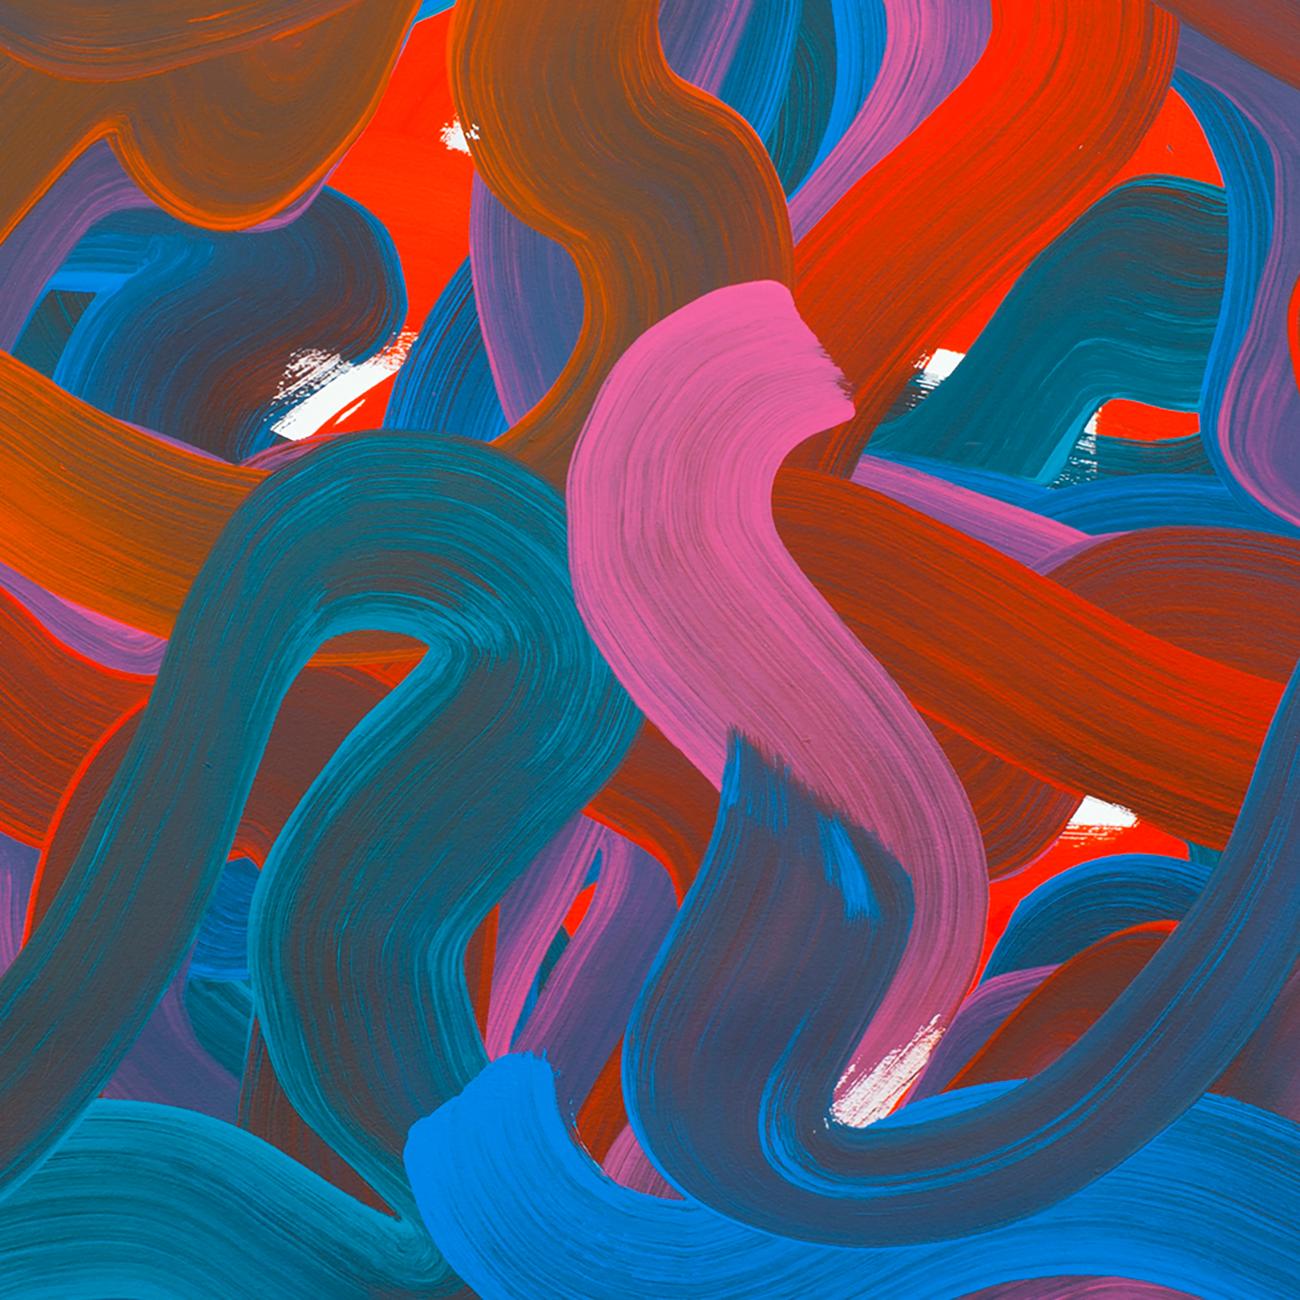 Wiggle No.22 (Abstract painting)
Oil on Paper (Arches Oil Paper — 140 lb Cold press) — Unframed.
This work is exclusive to IdeelArt.

Leon Phillips is a Canadian artist who experiments with the materiality of colour, displaying its structural rather